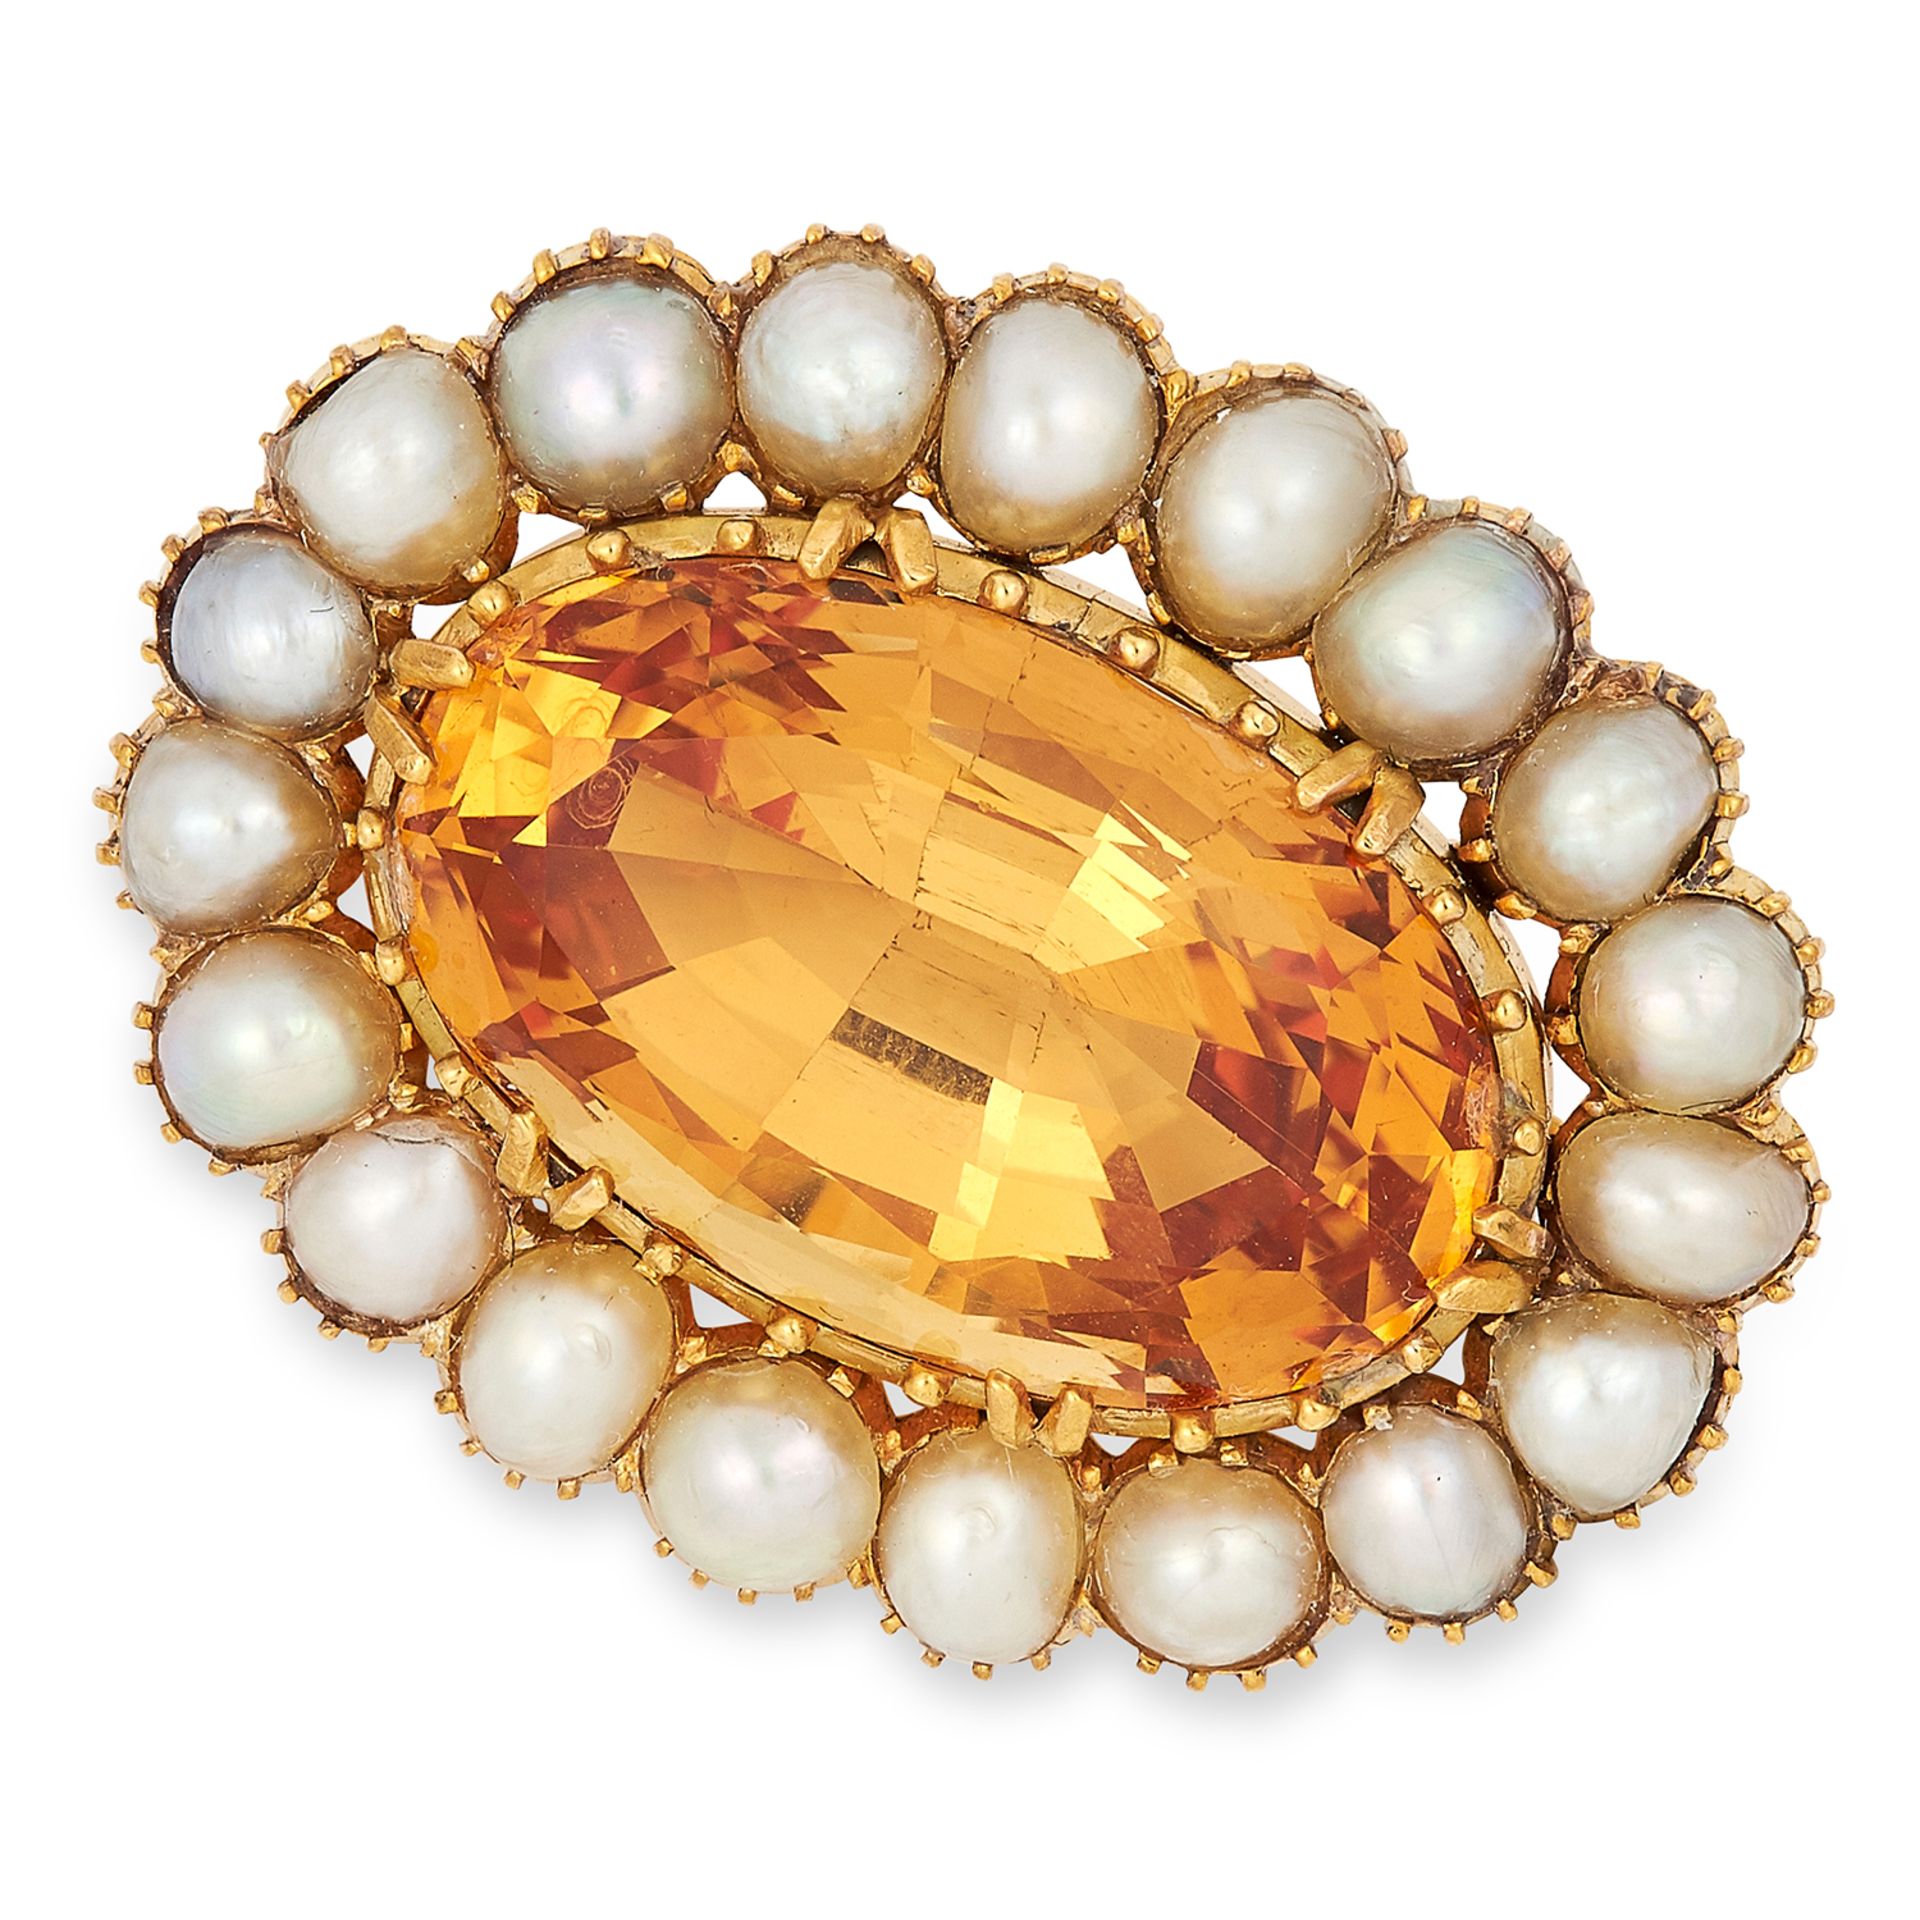 ANTIQUE IMPERIAL TOPAZ AND PEARL BROOCH set with an oval cut imperial topaz of approximately 7.54